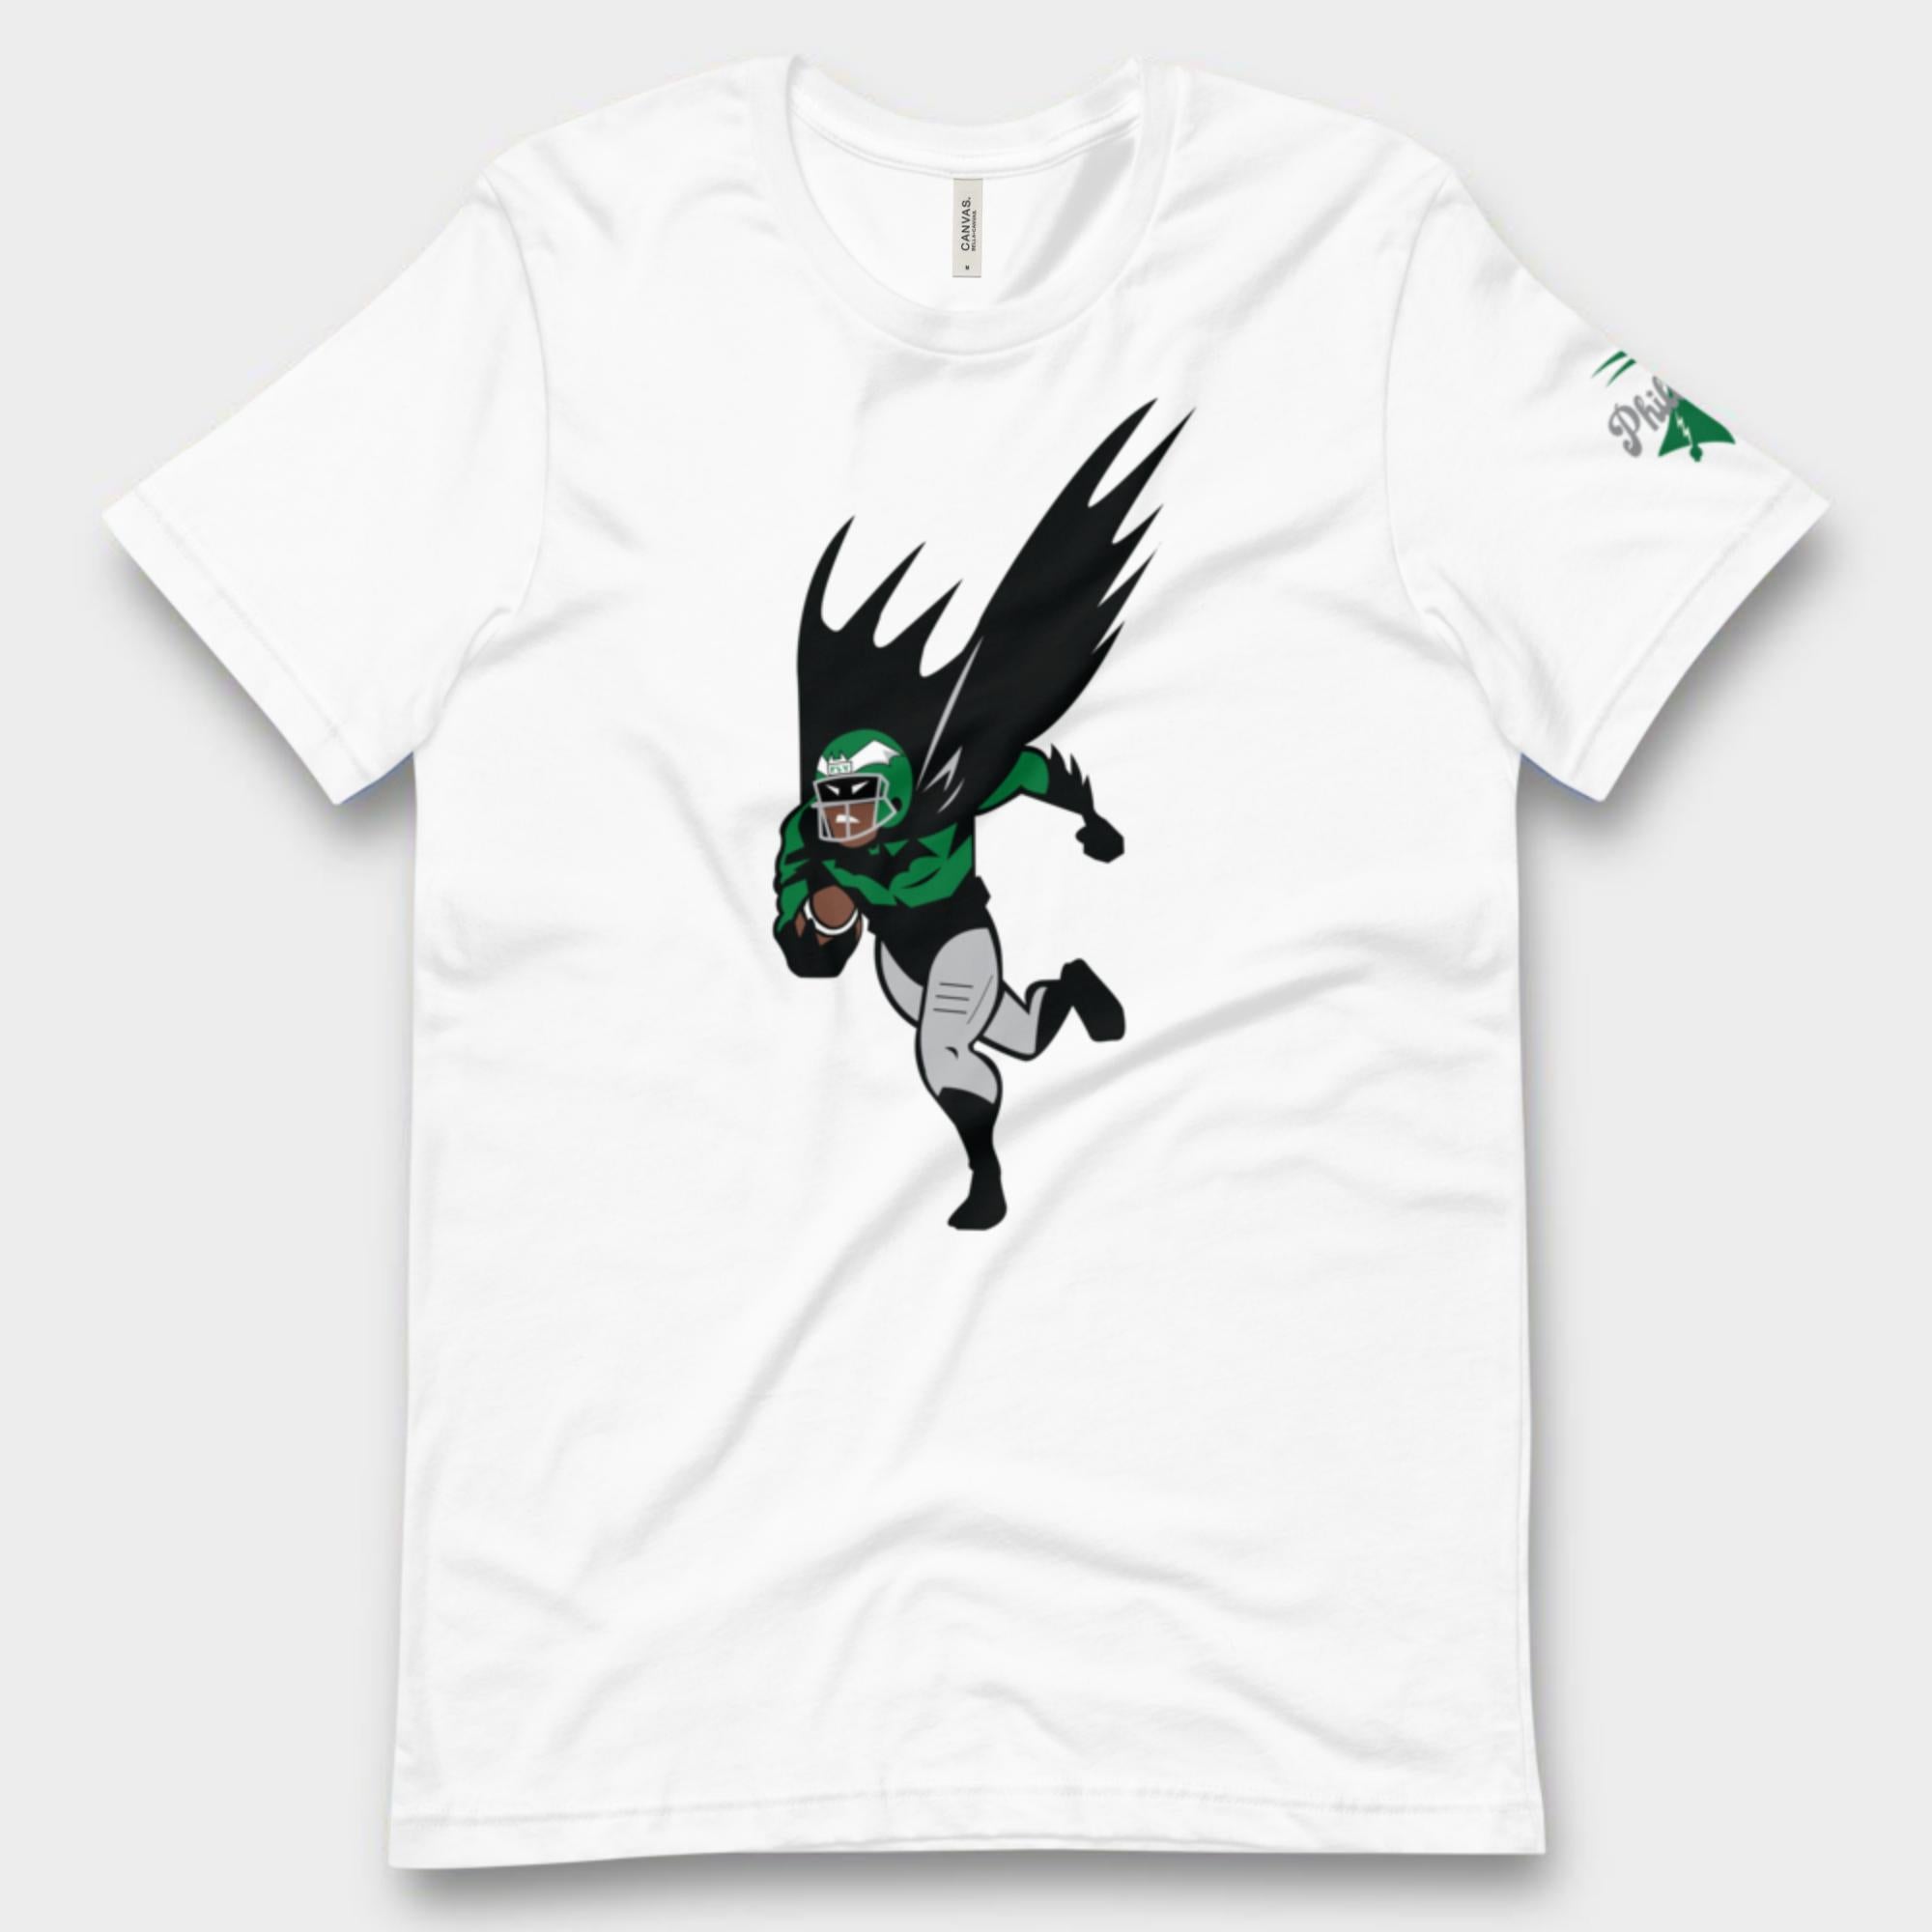 "The Caped Receiver" Tee